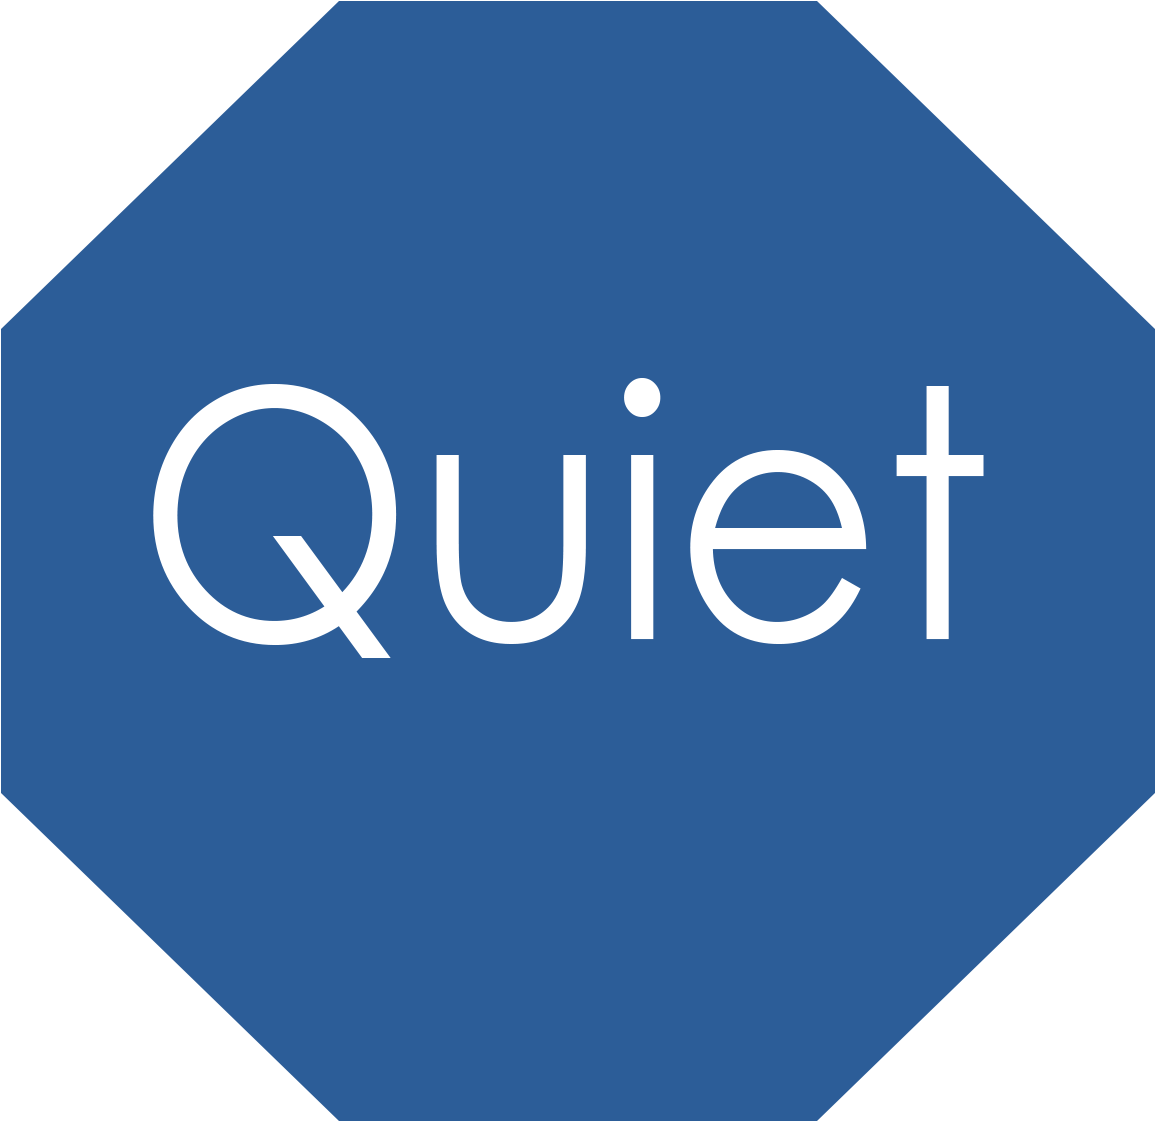 Quiet Text Graphic Blue Background PNG image